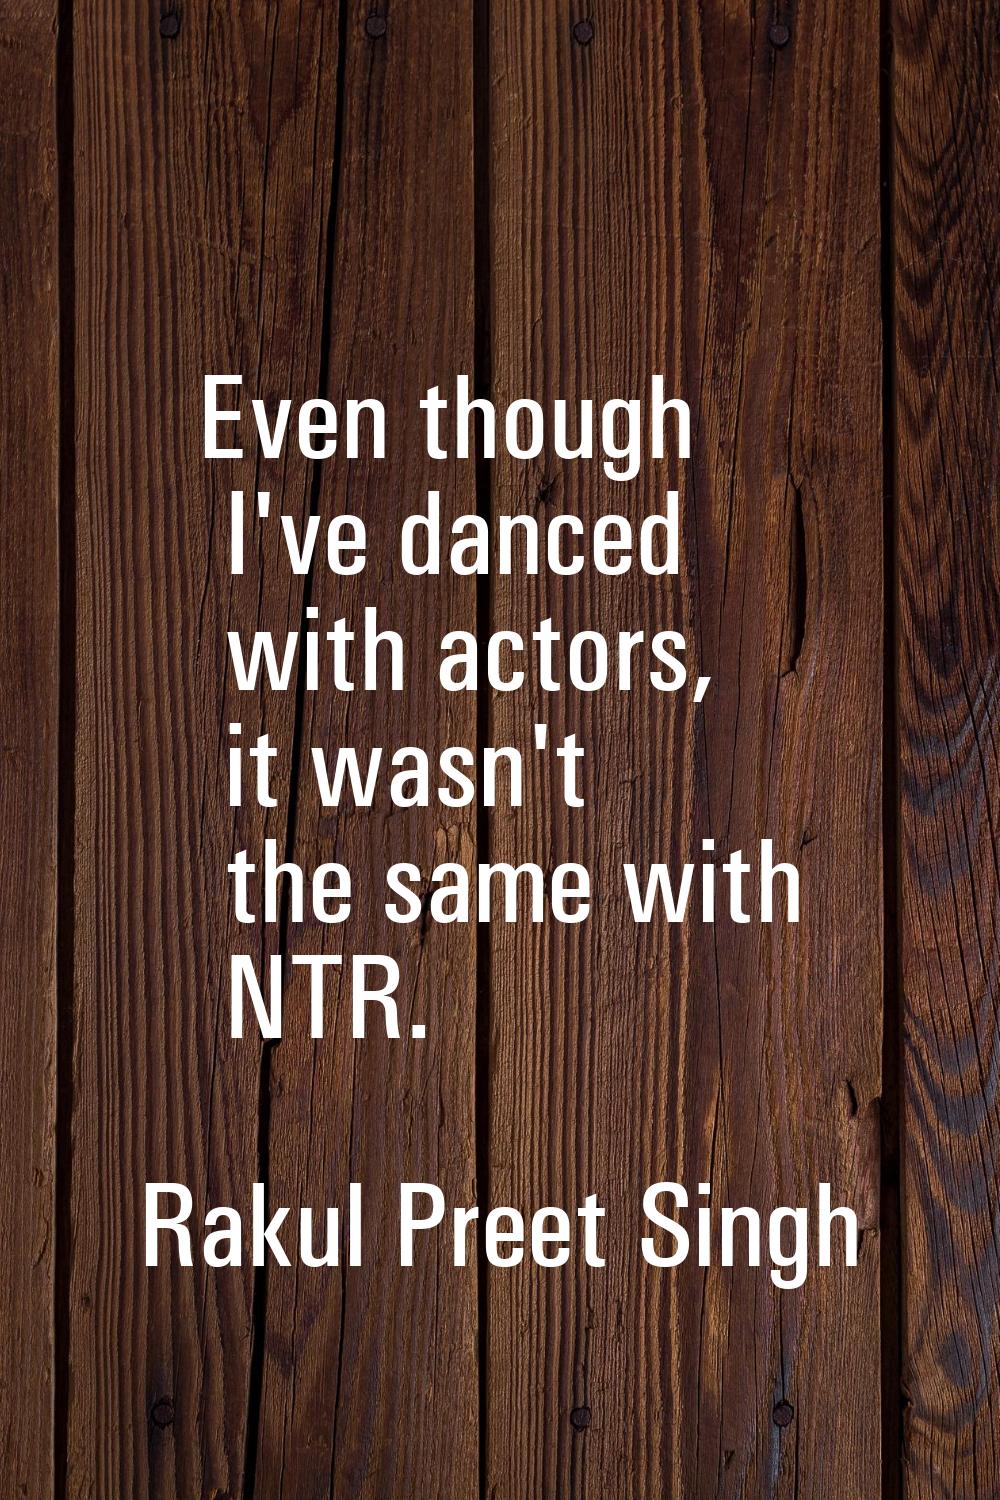 Even though I've danced with actors, it wasn't the same with NTR.